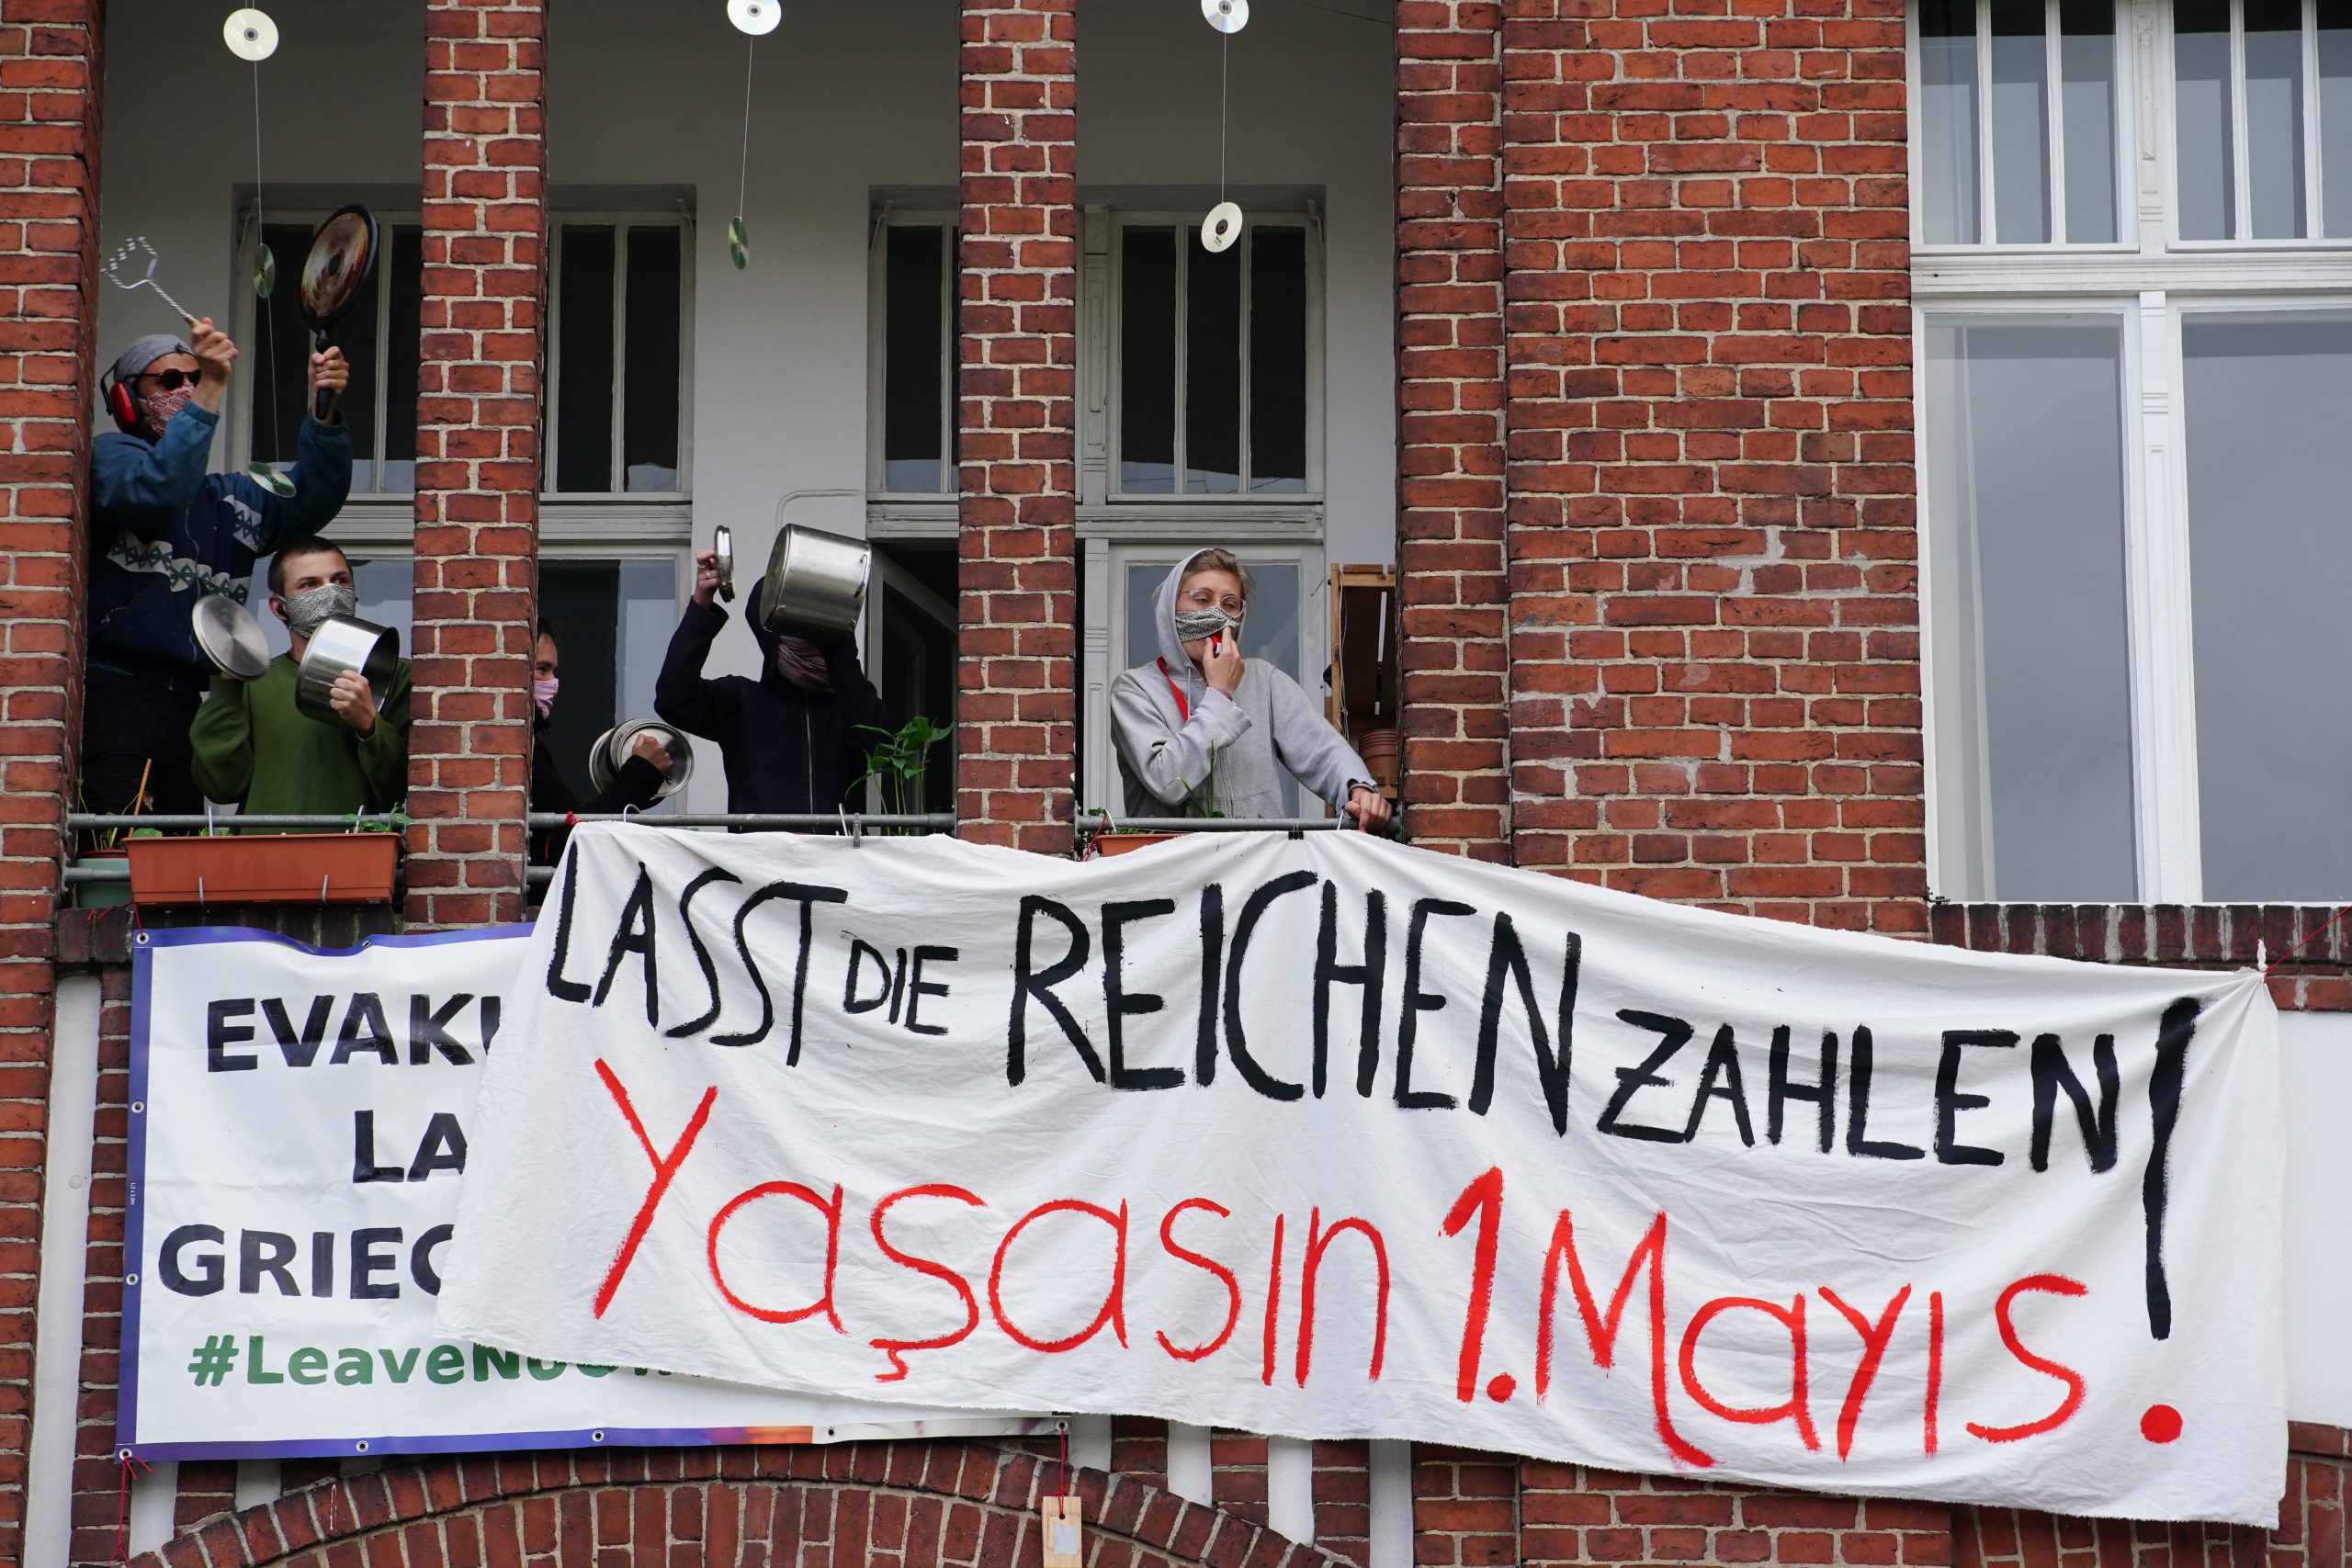 epa08393798 Demonstrators on a balcony wear protective masks holding banners reading 'Let the rich pay' during a protest in the Berlin district Wedding in Berlin, Germany, 30 April 2020. On the eve of the feast day of Saint Walpurga, in German tradition witches are believed to hold an annual meeting in a range of wooded hills in central Germany as they await the arrival of spring. In the late 19th century, May Day was chosen as the date for International Workers' Day with rallies and demonstrations up until now. This year, May Day takes place under the influence of the pandemic crisis of the SARS-CoV-2 coronavirus which causes the Covid-19 disease.  EPA/CLEMENS BILAN